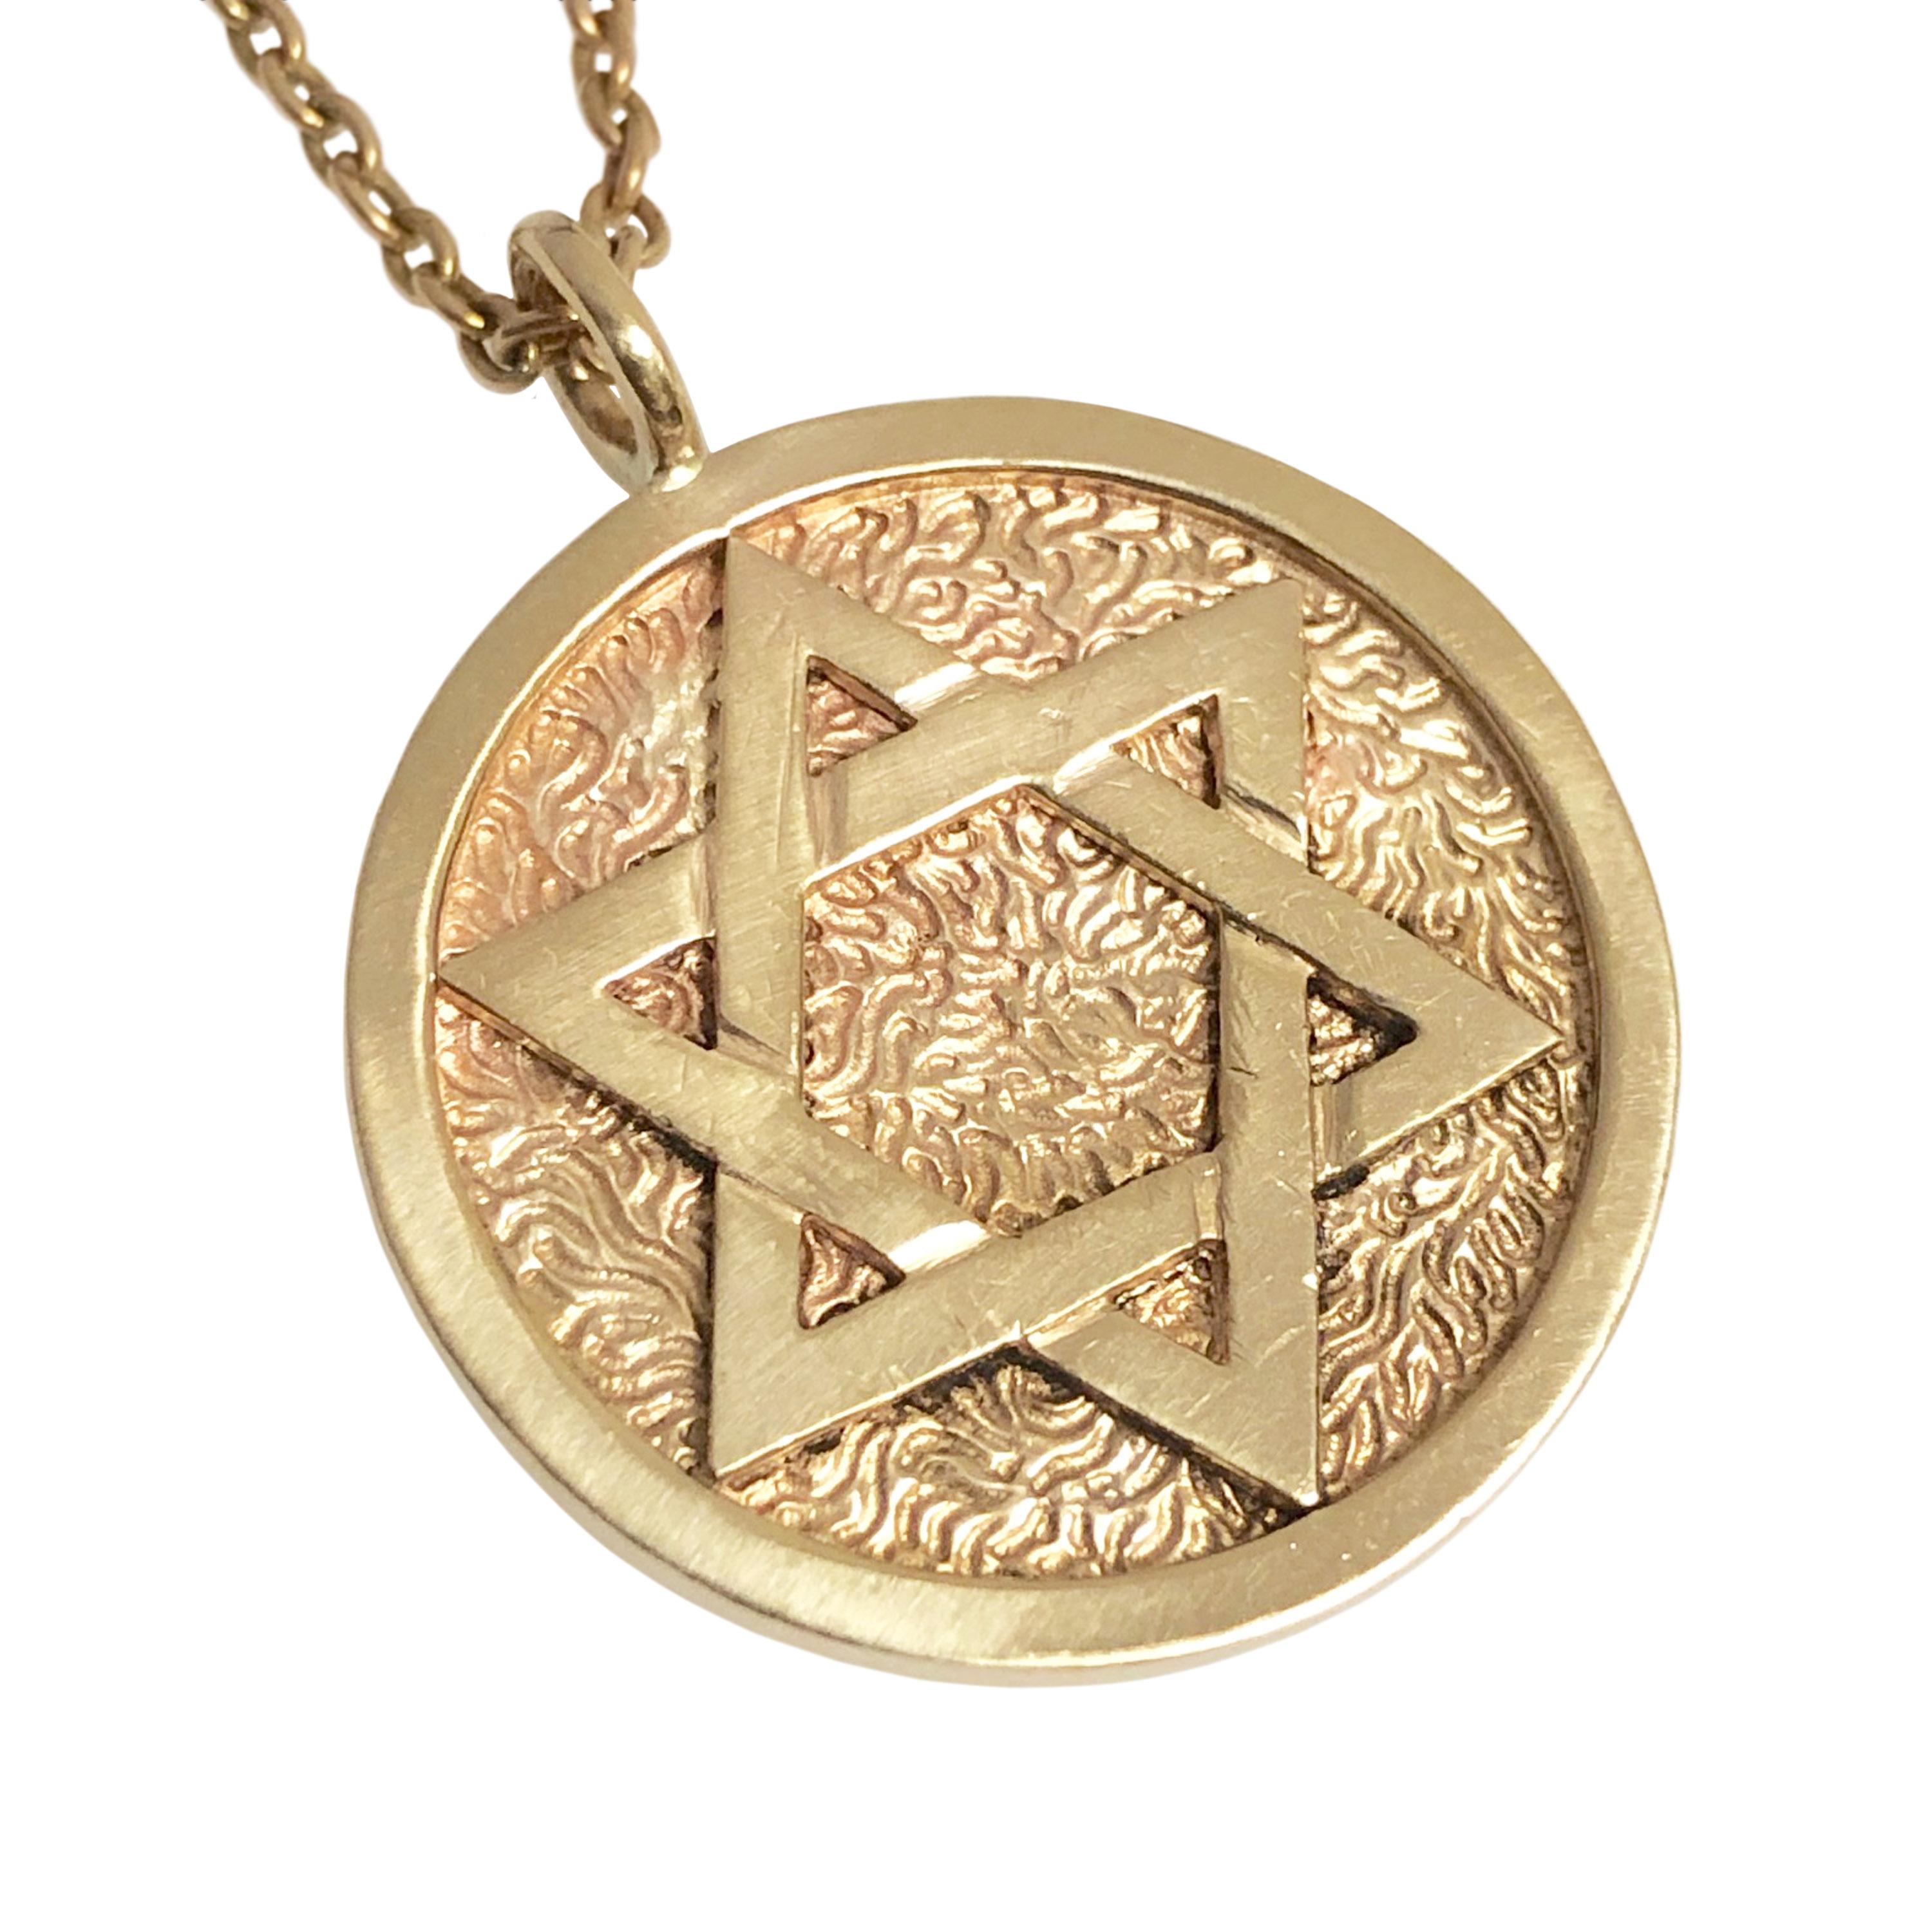 Circa 1960s 14K yellow Gold Star of David Pendant Necklace, A gift from Sammy Davis Jr. To his Hollywood Icon friend Jerry Lewis. The Disk form pendant measures 1 inch in diameter and is 2 MM Thick. Suspended from a 16 inch Yellow Gold chain. Total